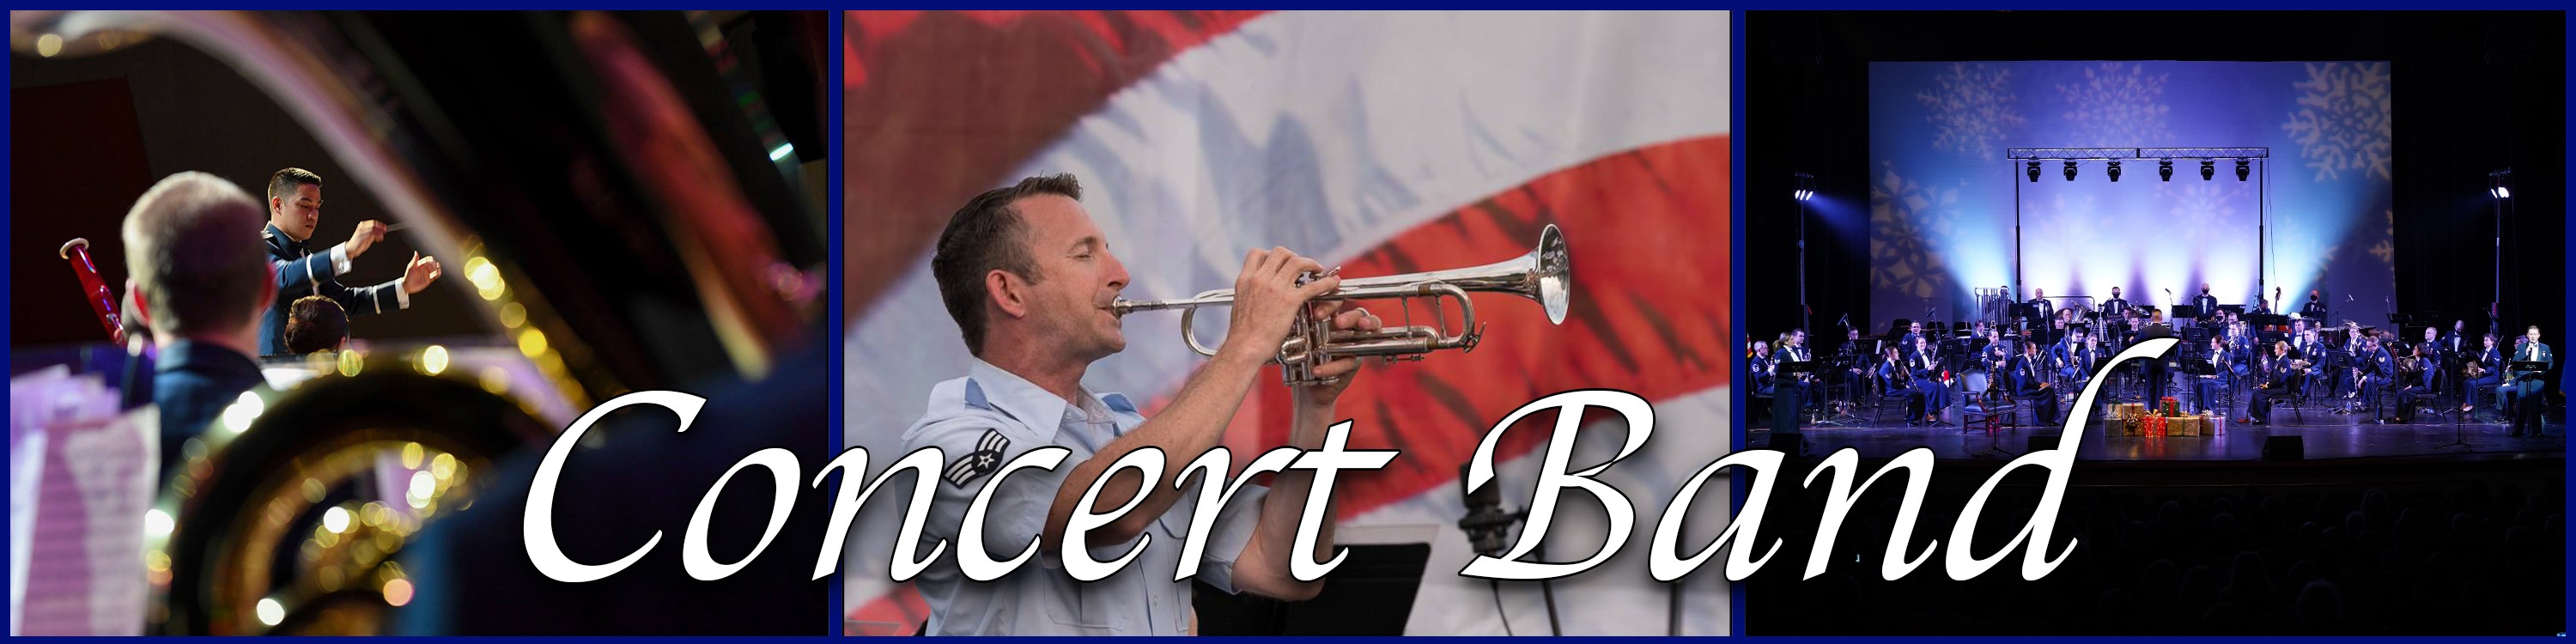 A three-part graphic created to show three scenes of the Heritage of America Concert Band. There is a blue border around the outside and between the images. On the left is a close photo of a tuba player, in the center a trumpet player performs in light blue uniform in front of an American flag, and on the right the full concert band sits on a dark stage illuminated by bright lights. White text above them all reads "Concert Band" in italics.